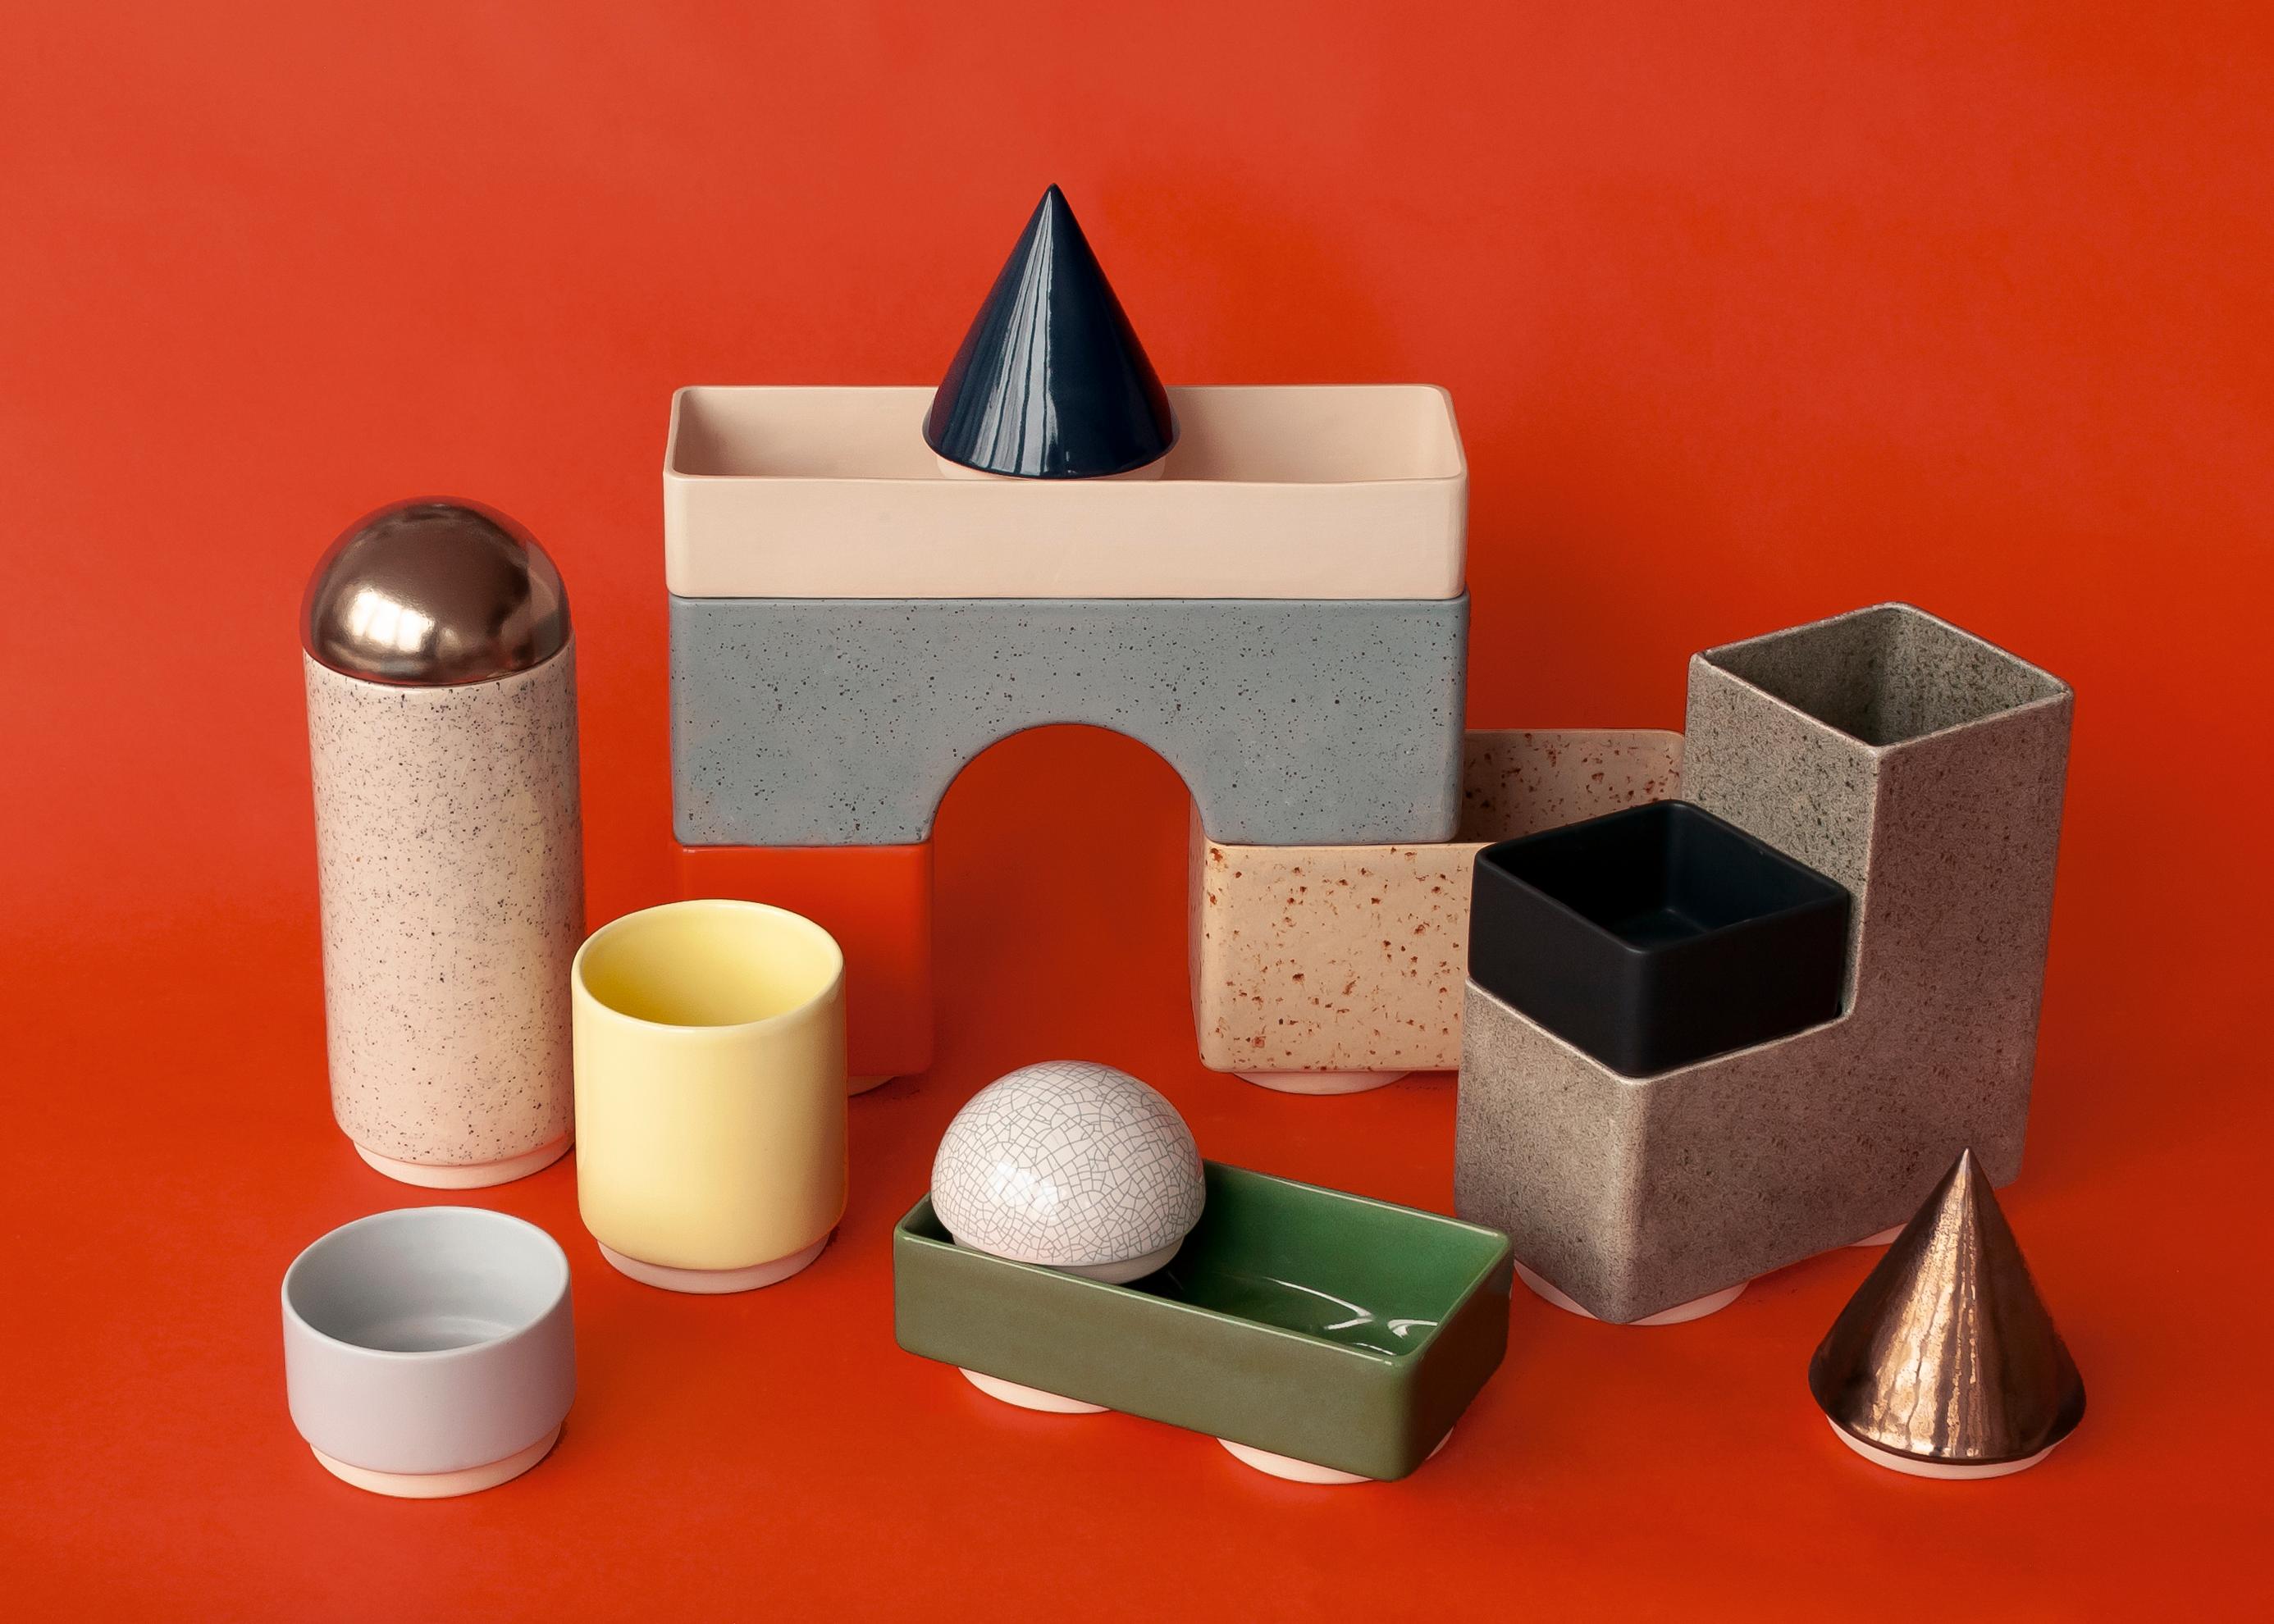 KNSTRKT is a Memphis inspired centerpiece that combines the principles of a stackable industrial tableware with the playfulness of postmodern design. 
The new in-house serial production just started and we are very proud to offer you the very first